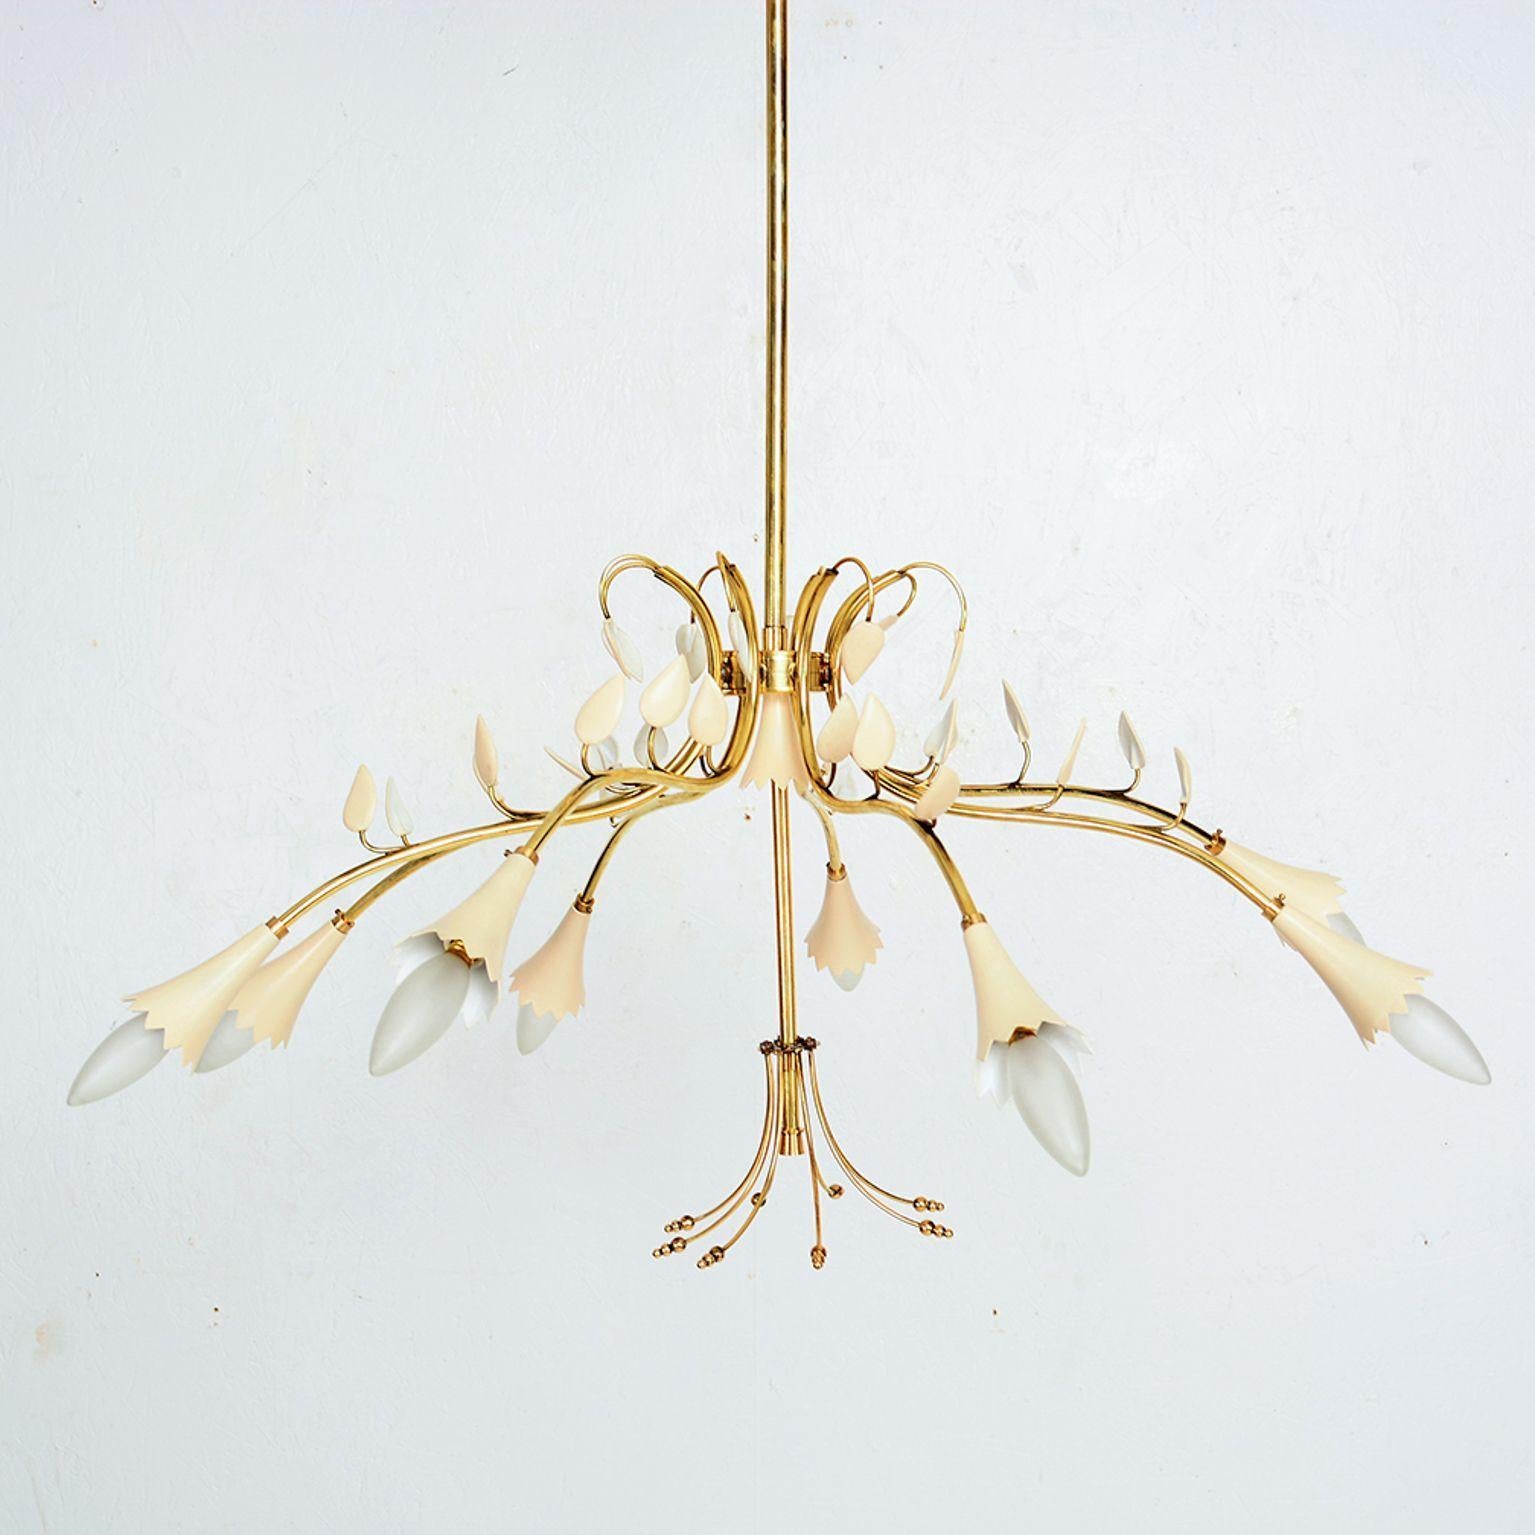 1950s Italy beautiful Italian chandelier attributed Stilnovo
No label
constructed with brass and aluminum shades.
eight arms with solid brass leaves with flower
Chandelier rewired good vintage preowned condition.
Height 45 in. x diameter 30